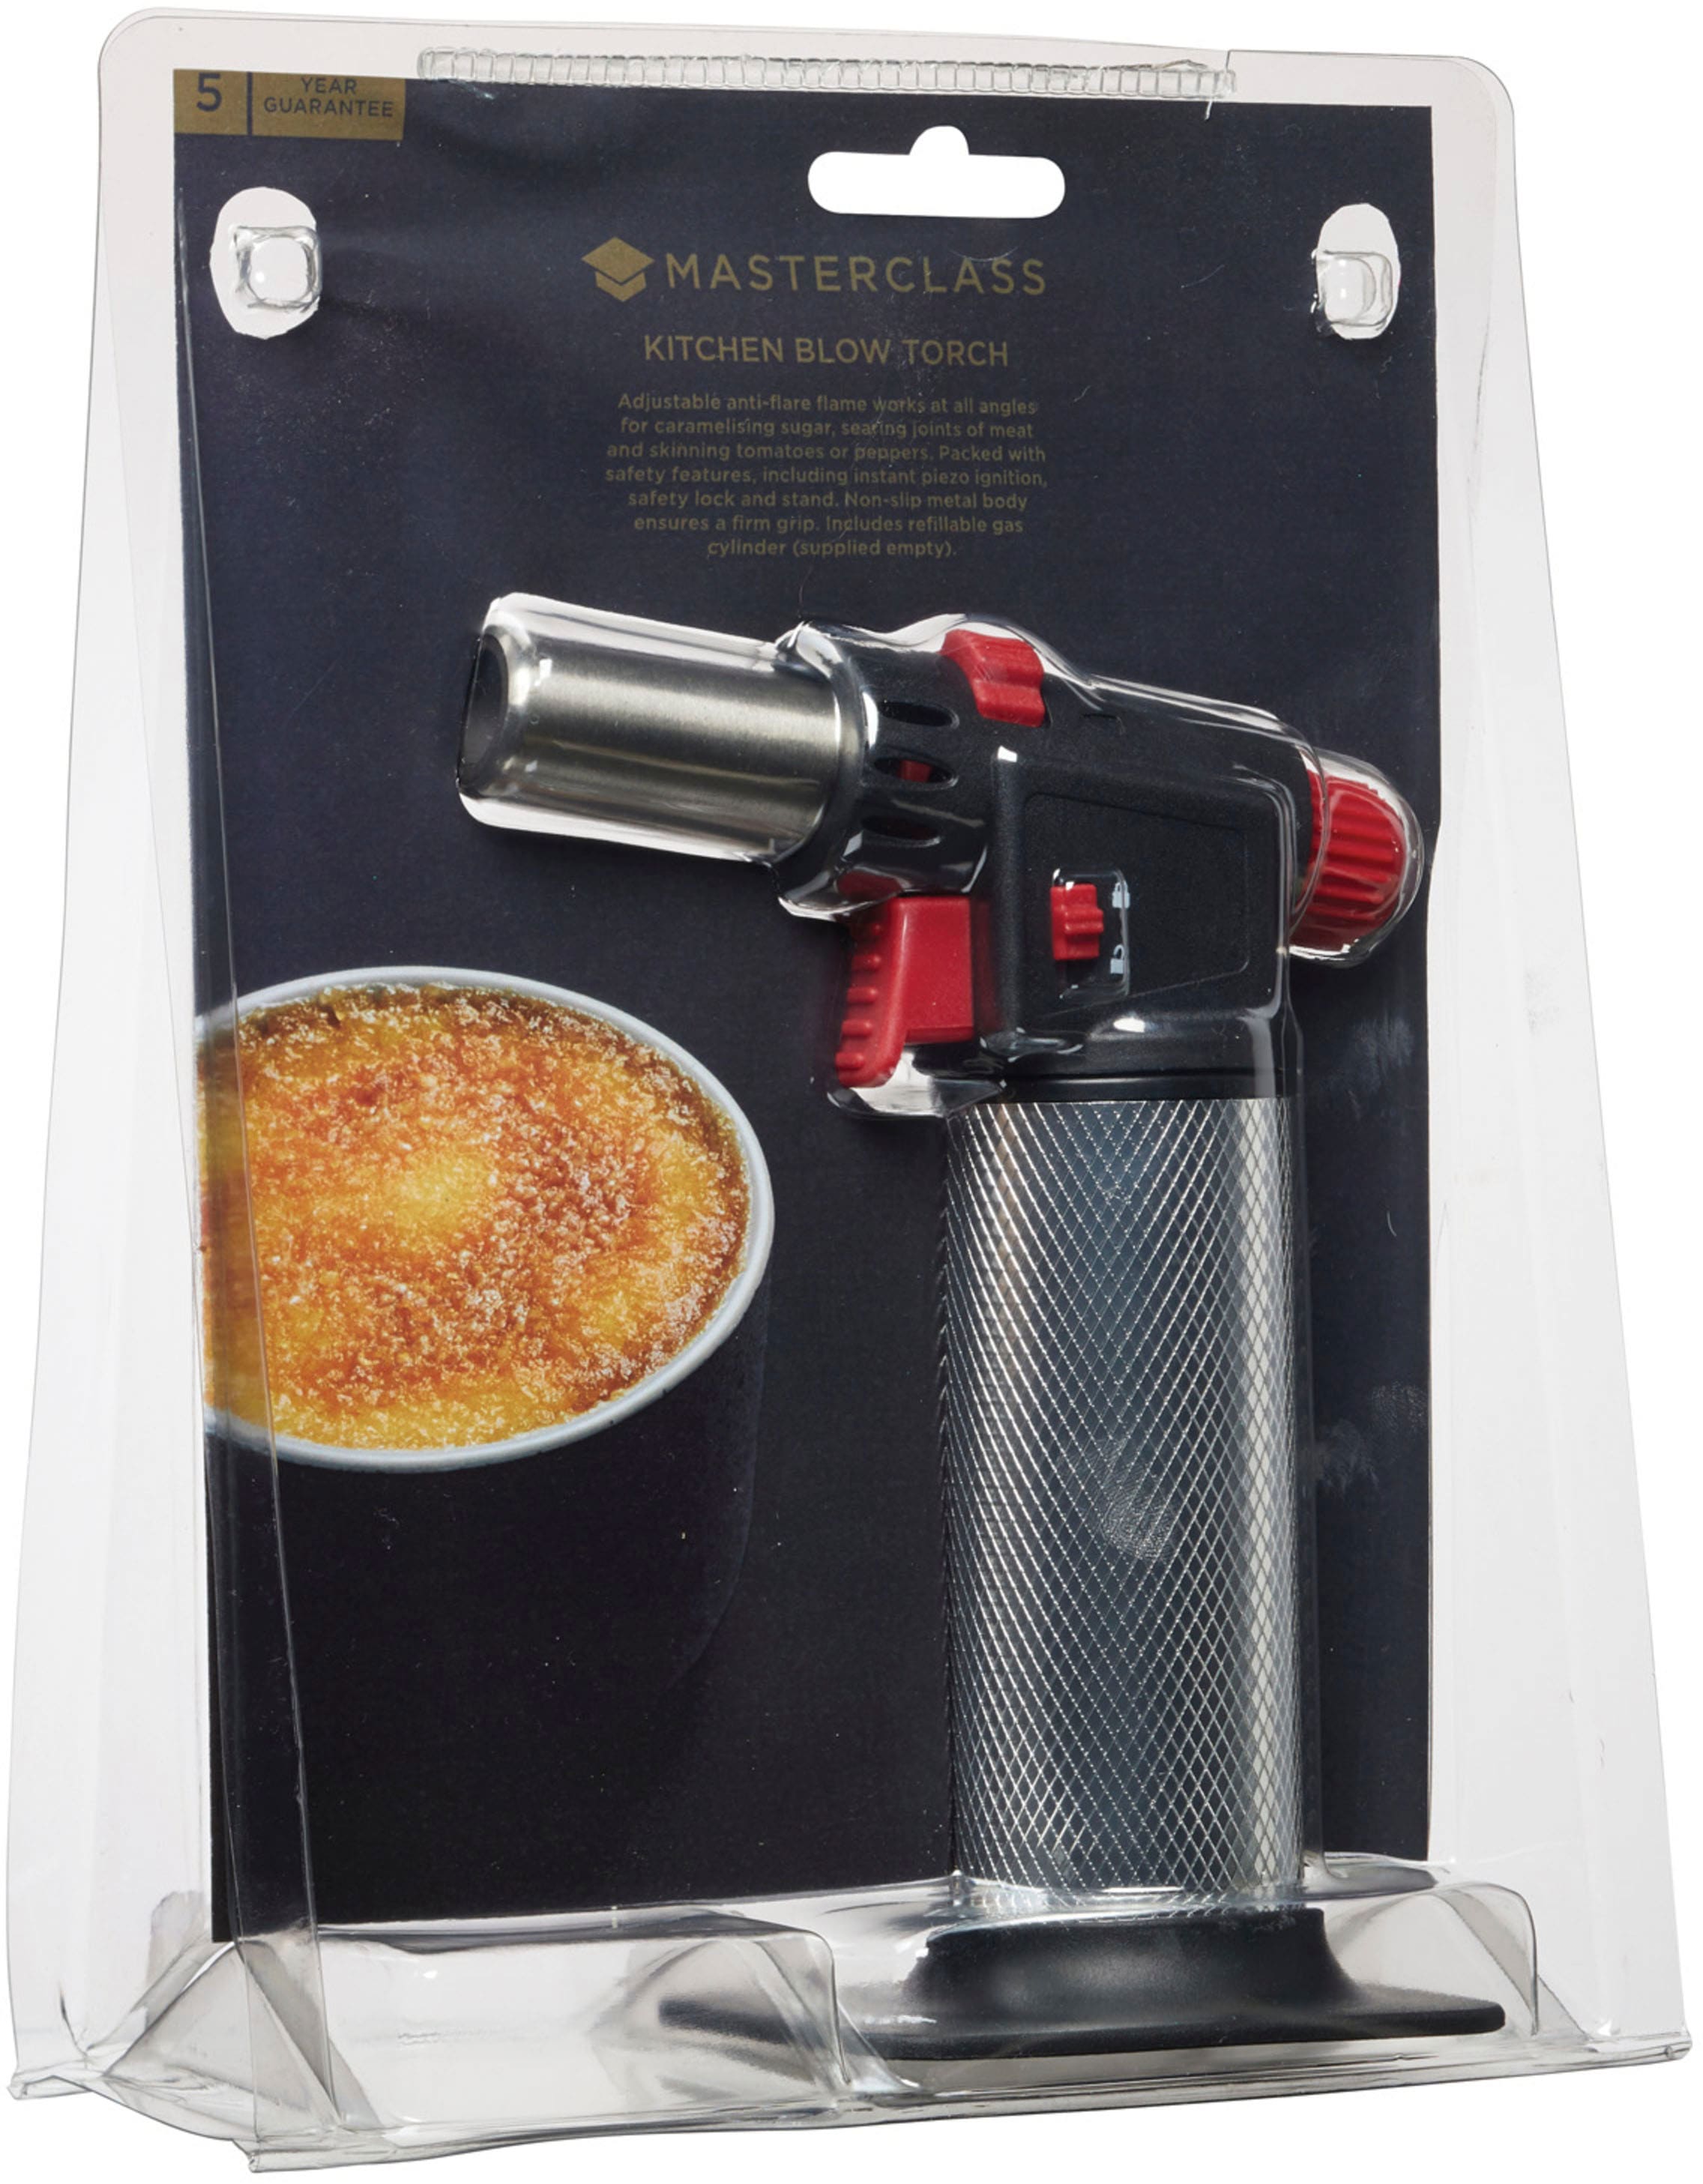 | Flambierbrenner Class Blowtorch«, Master tlg.) BAUR (1 Cook\'s »Professional